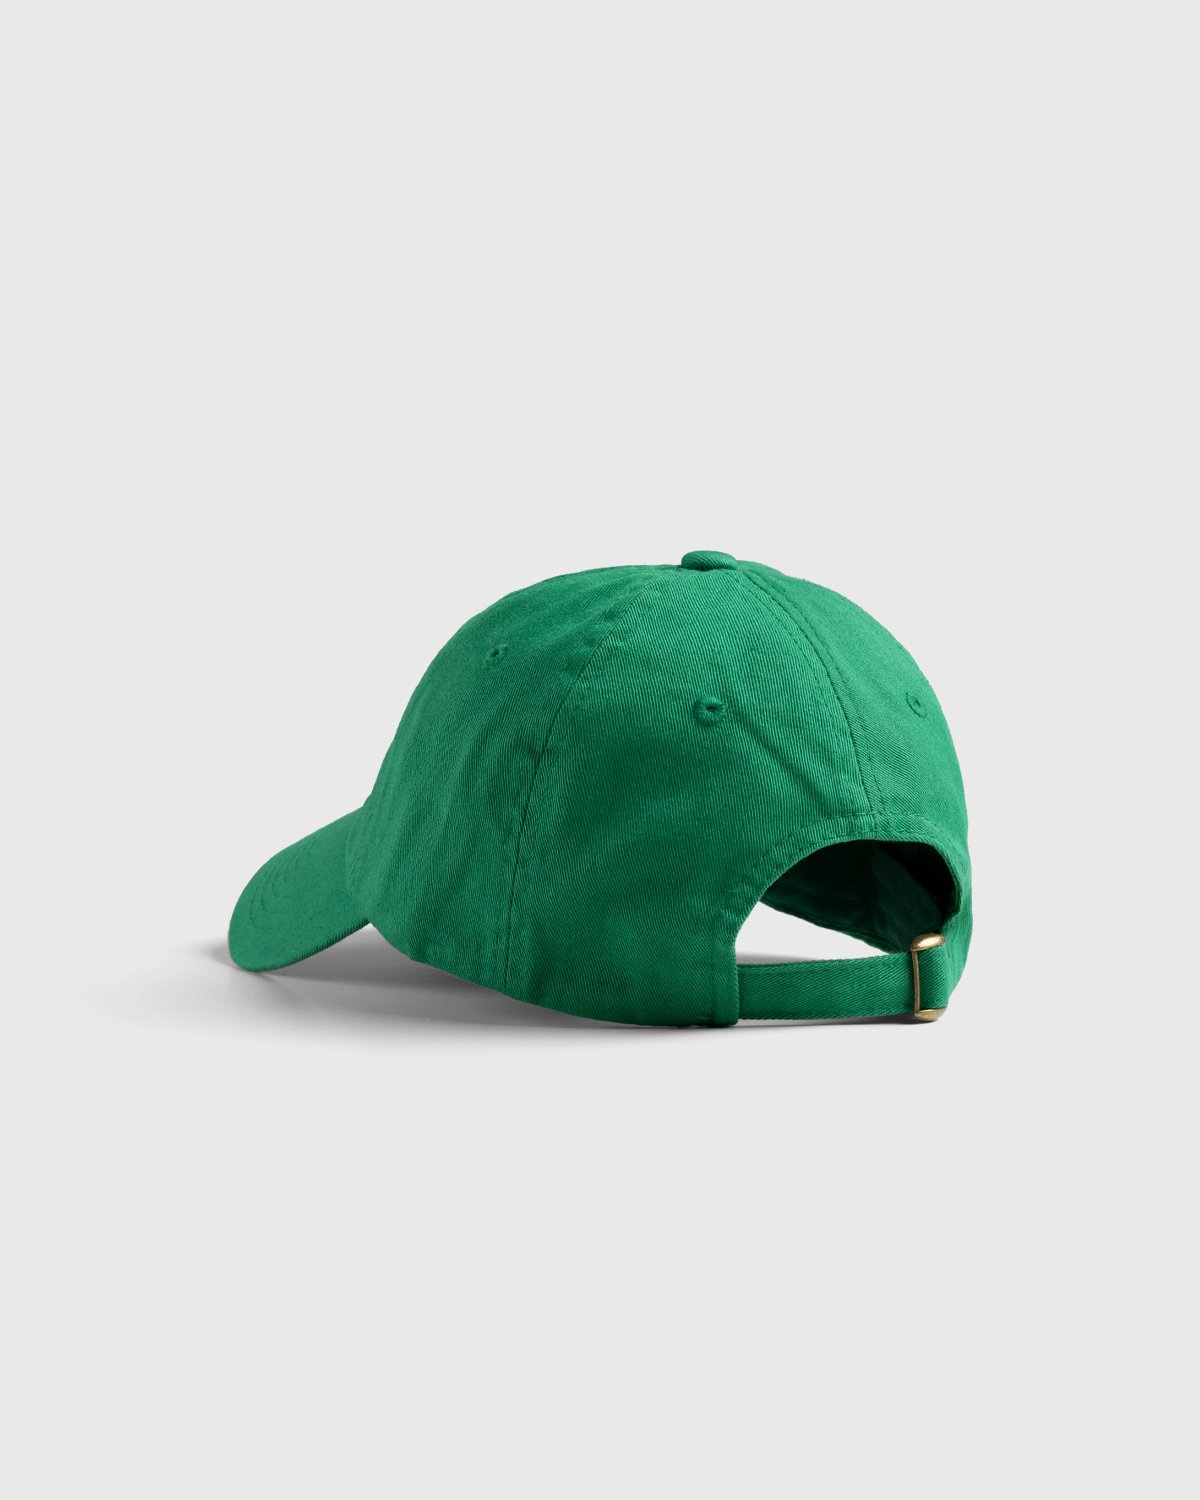 HO HO COCO - Handle With Care Cap Green - Accessories - Green - Image 3